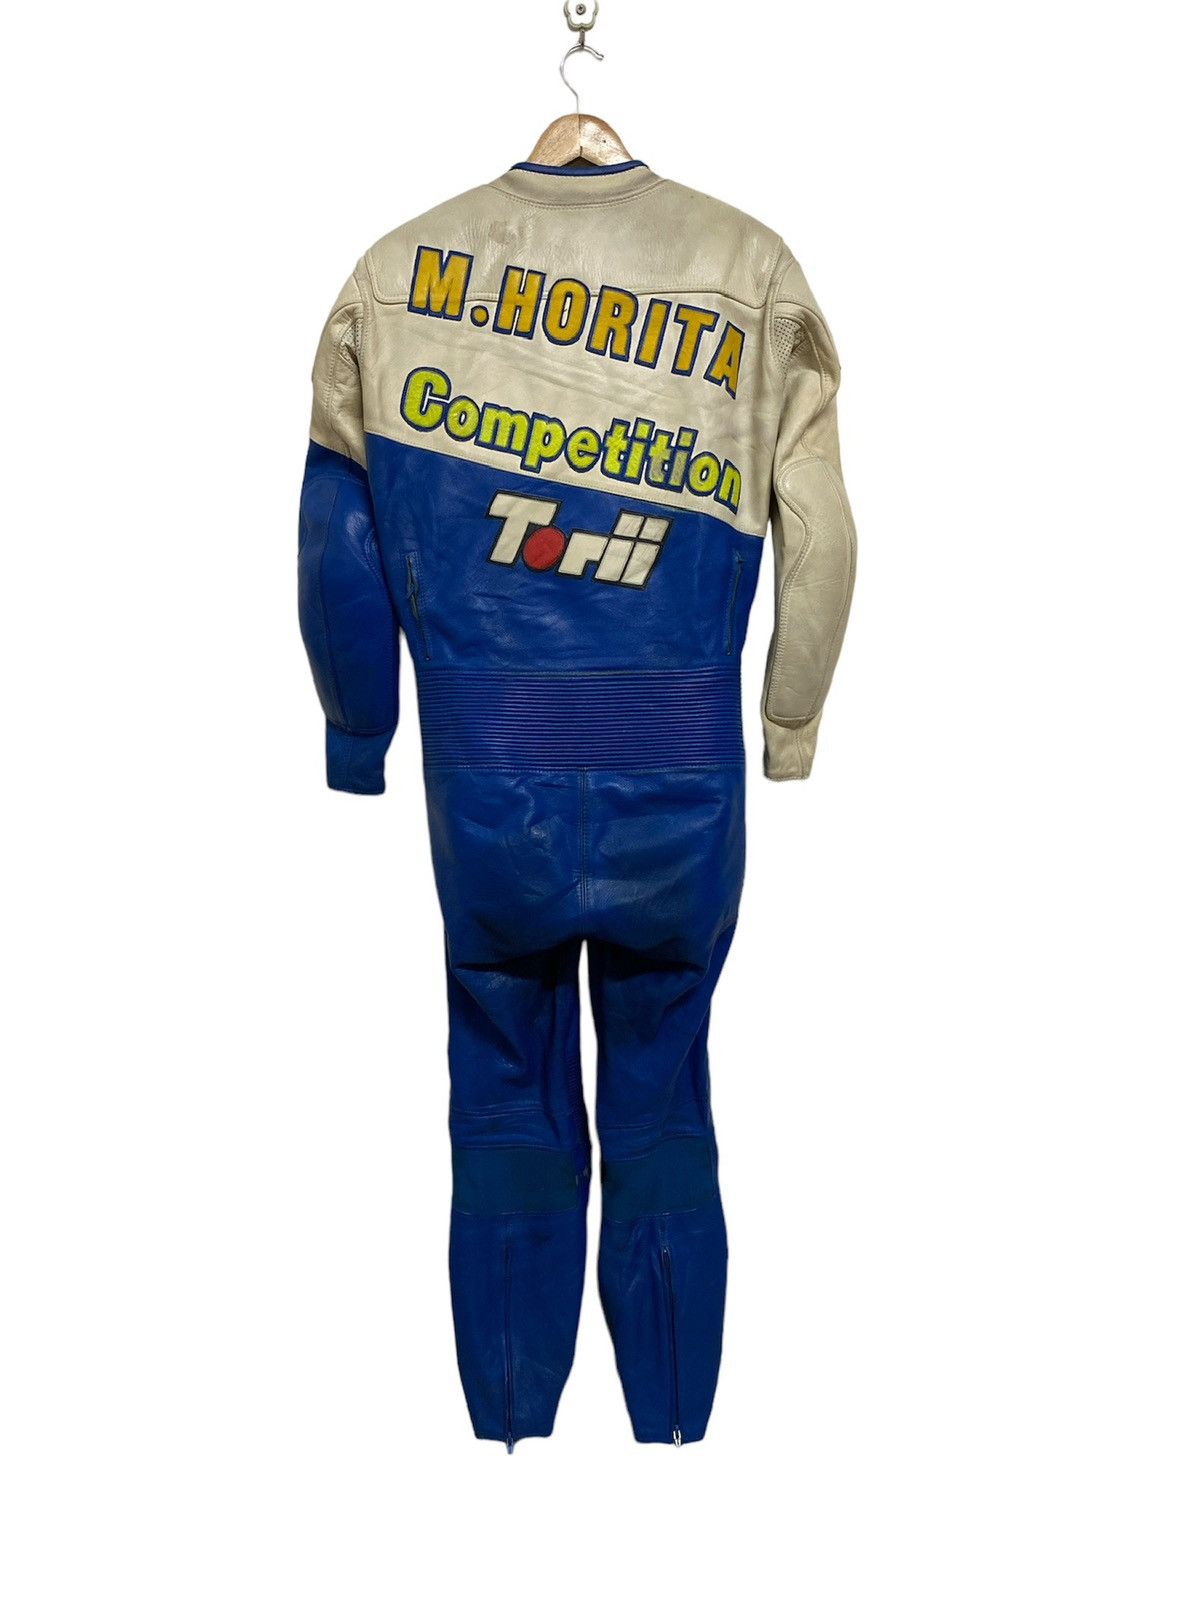 Sports Specialties - Vintage Japan Leather Racing Padded Suit Overall - 6